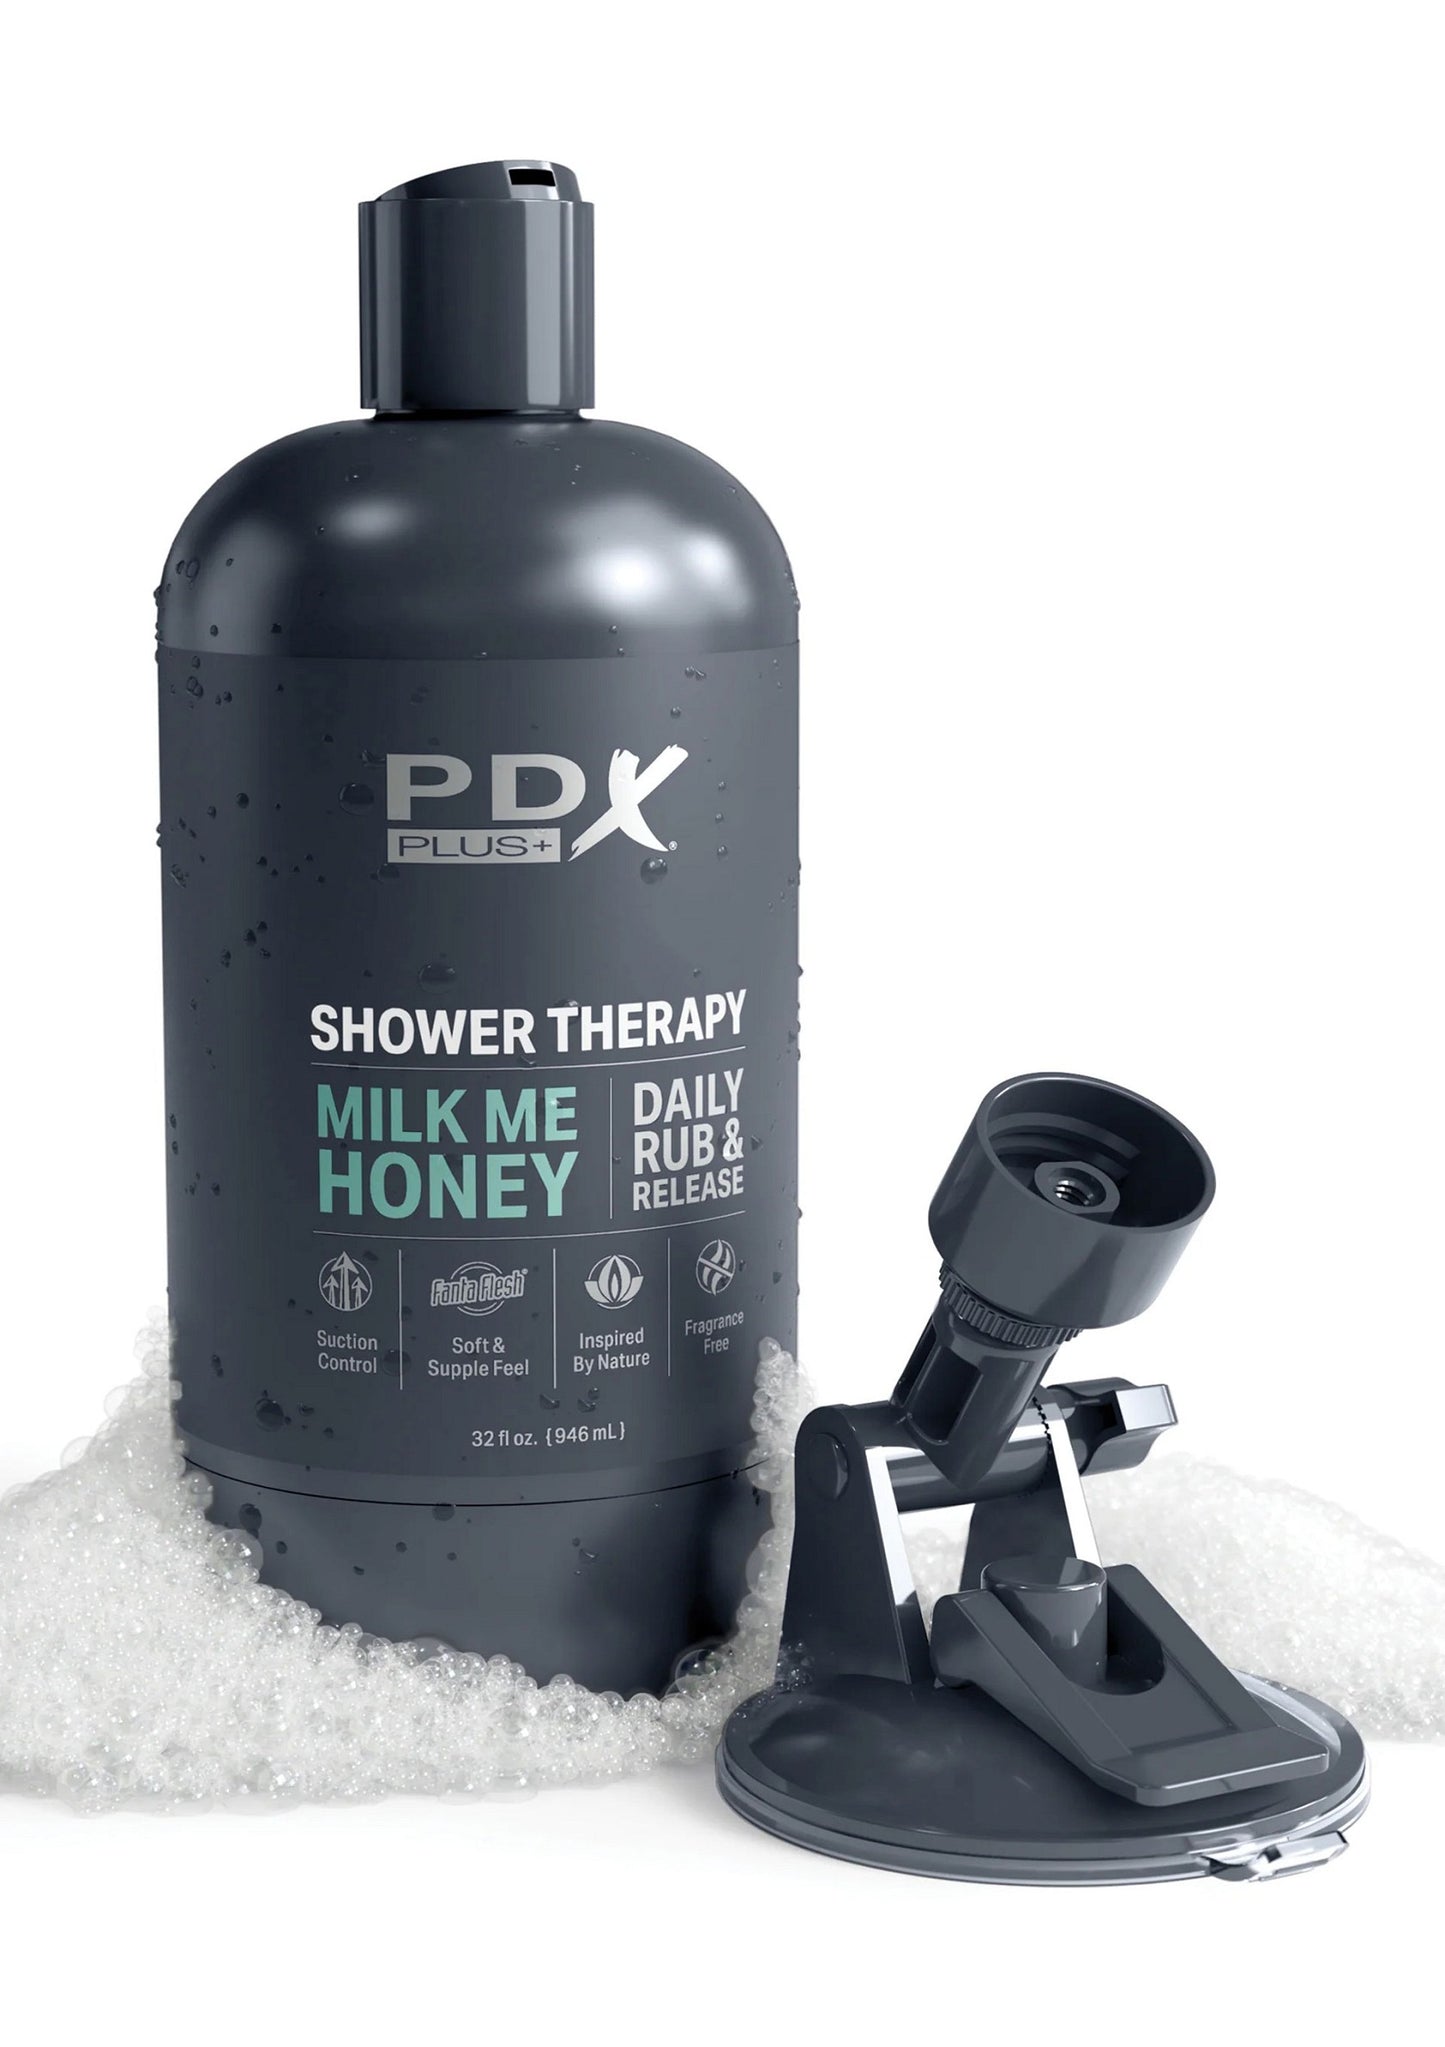 Pipedream PDX Plus Shower Therapy Milk Me Honey SKIN - 4